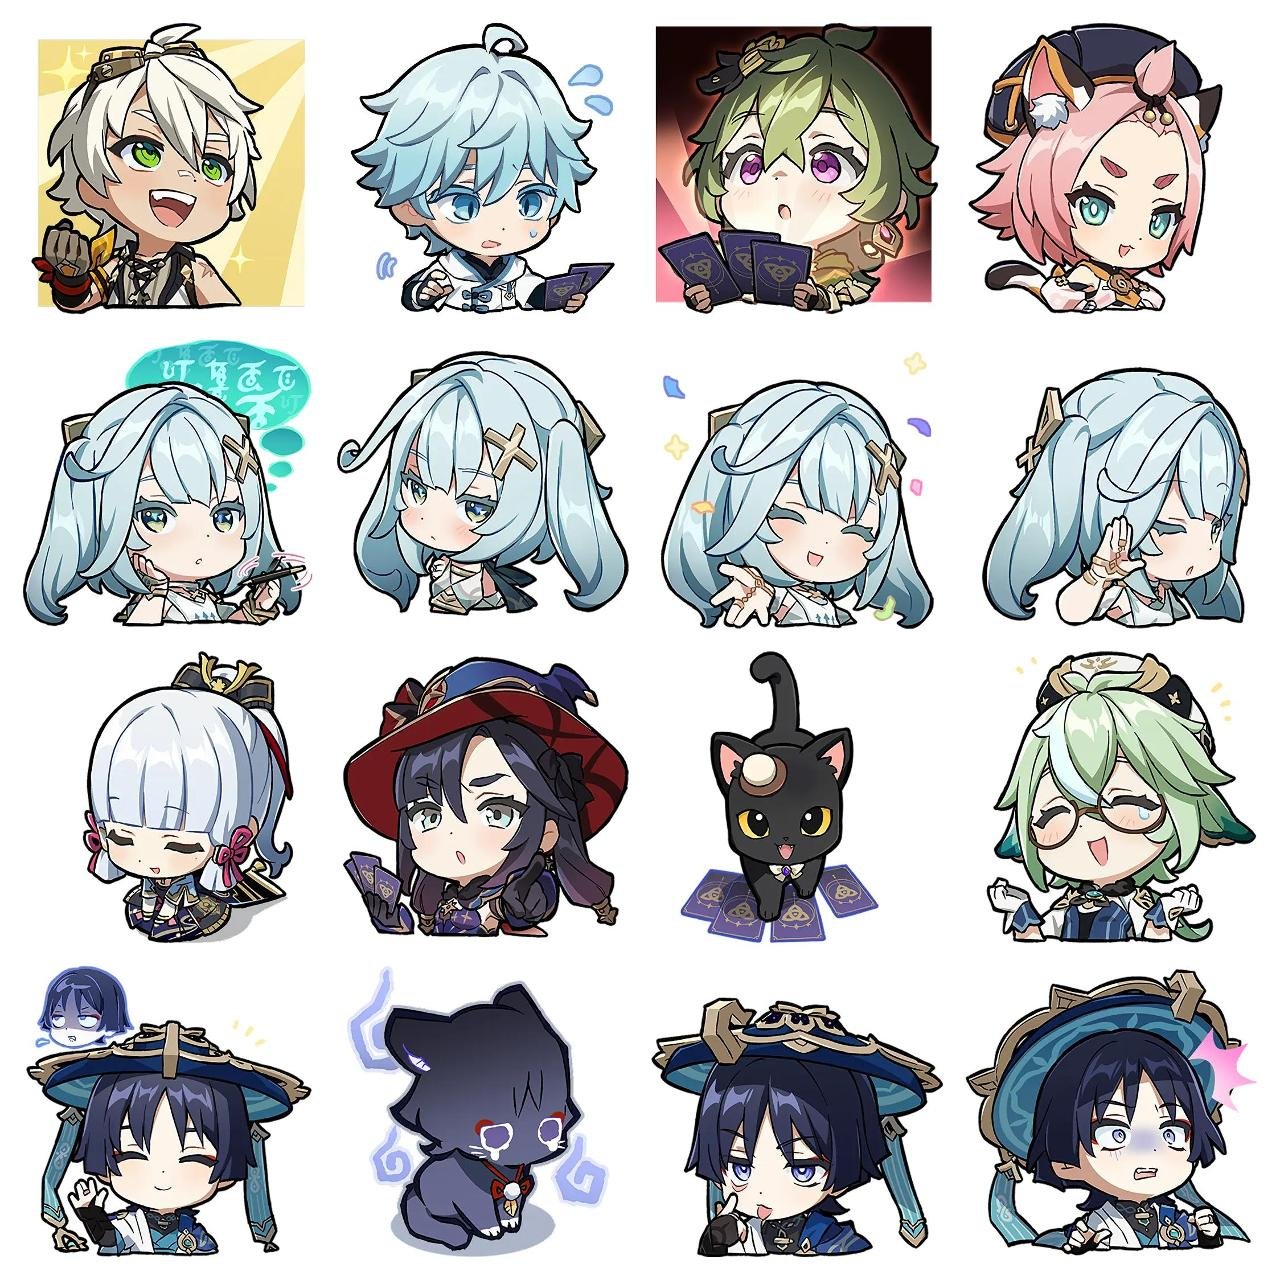 Genshin Impact #27 Anime, Genshin Impact, Game sticker pack for Whatsapp, Telegram, Signal, and others chatting and message apps